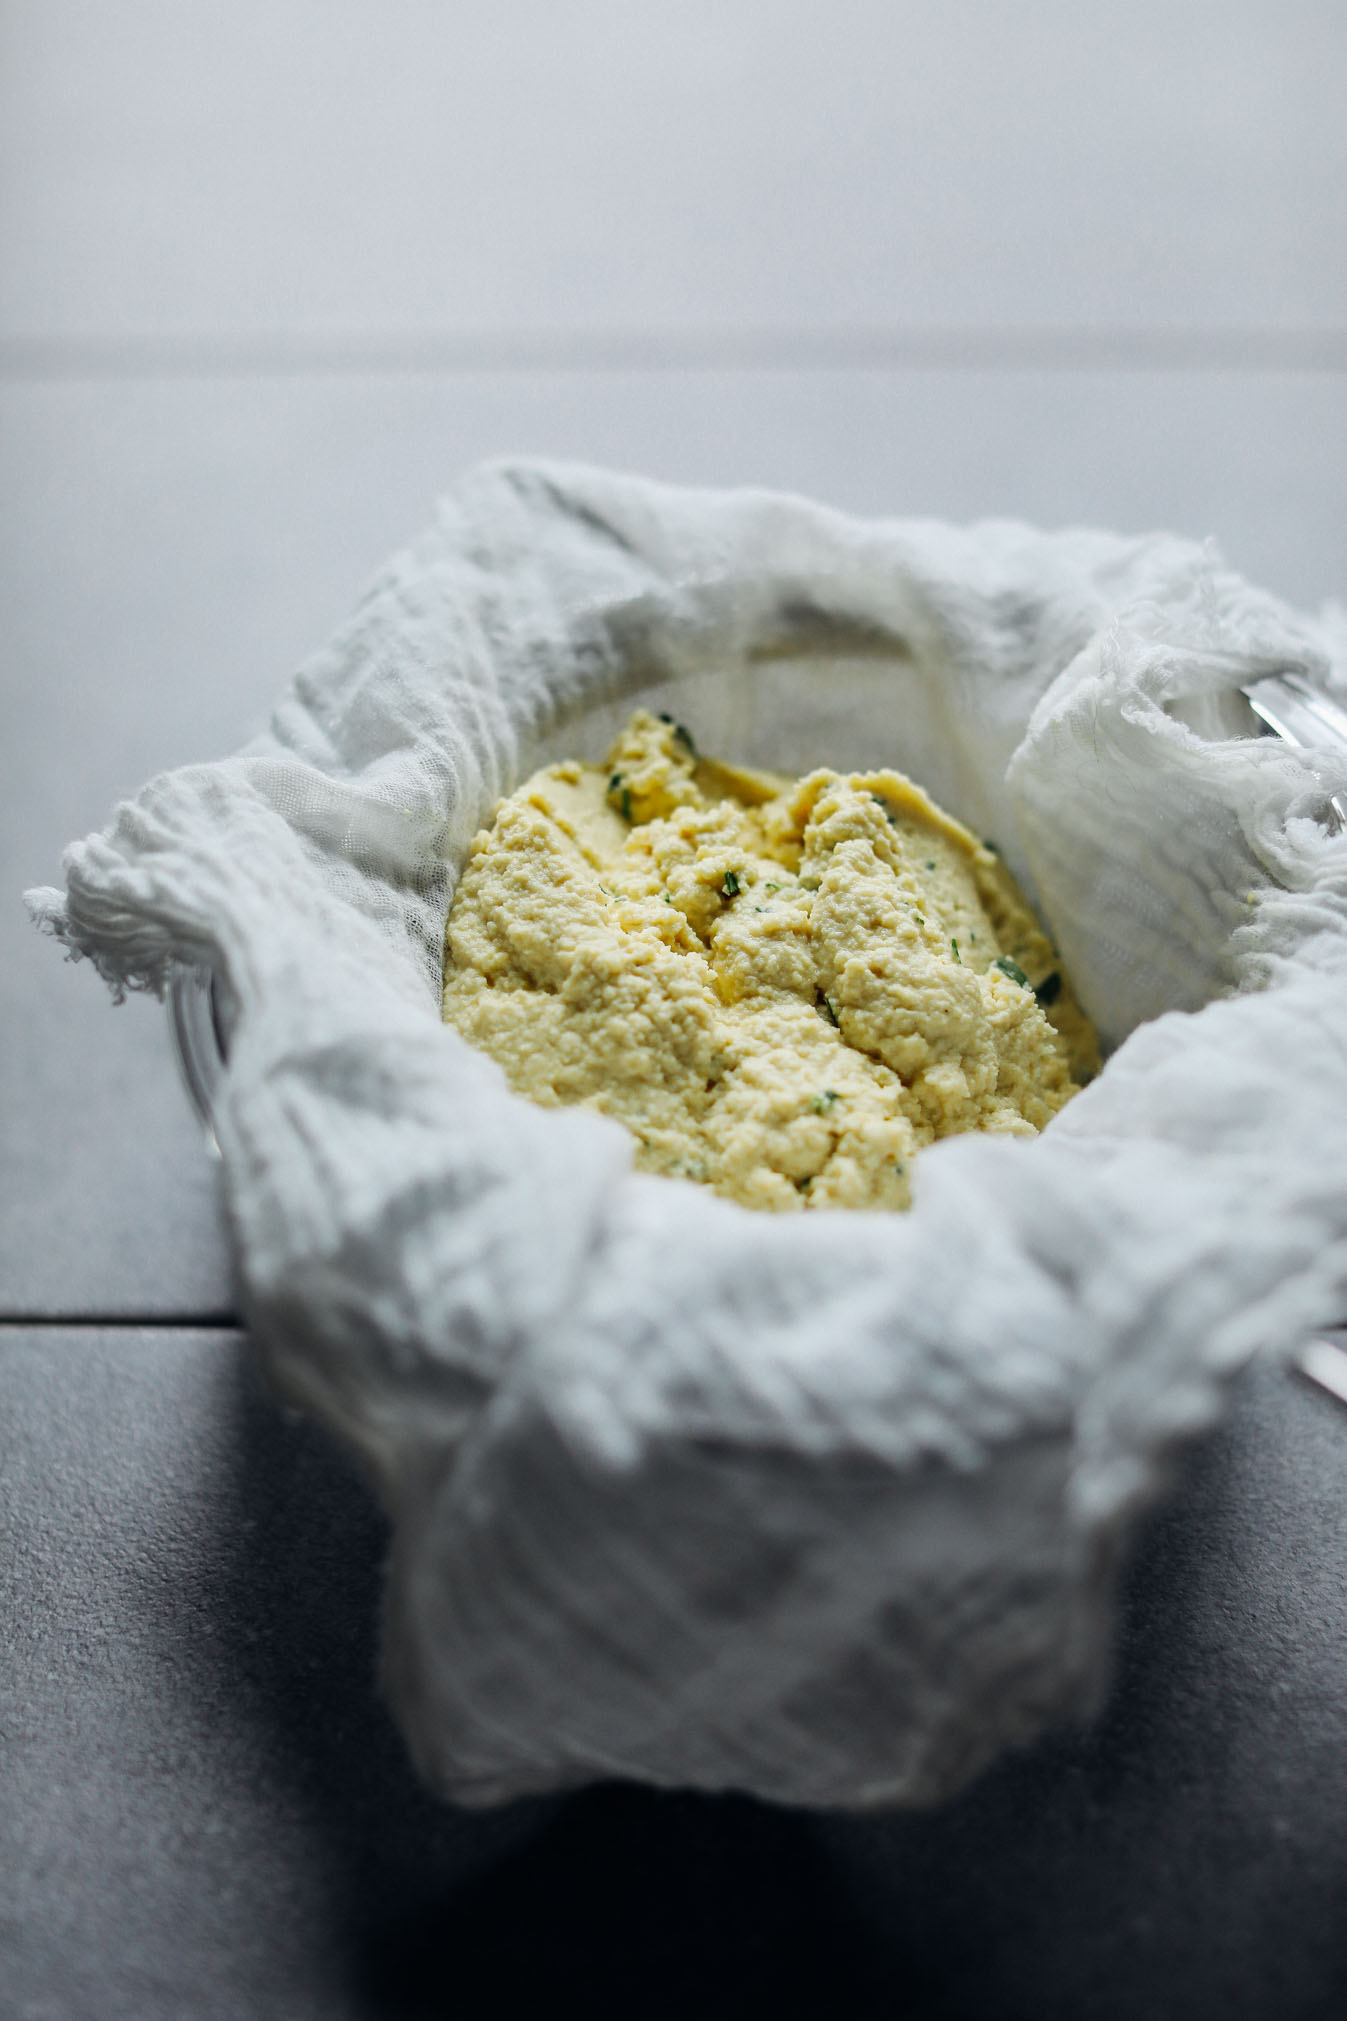 Glass bowl covered with a cheesecloth containing Macadamia Nut Herb Cheese